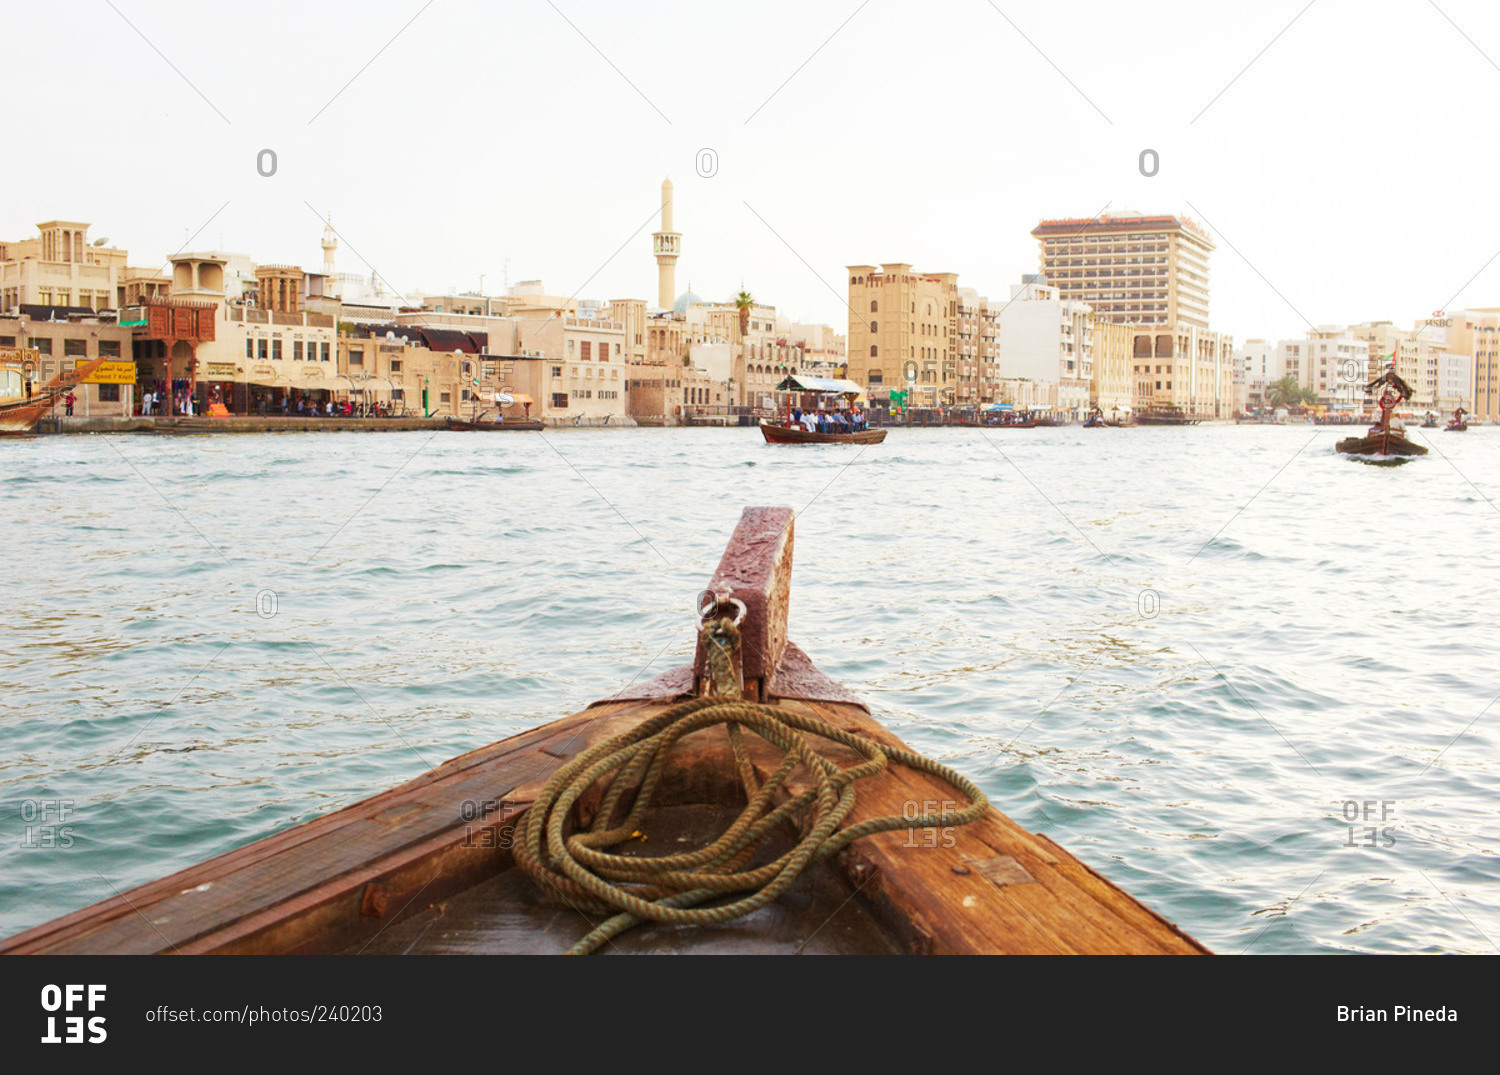 A wood boat on a canal in the United Arab Emirates